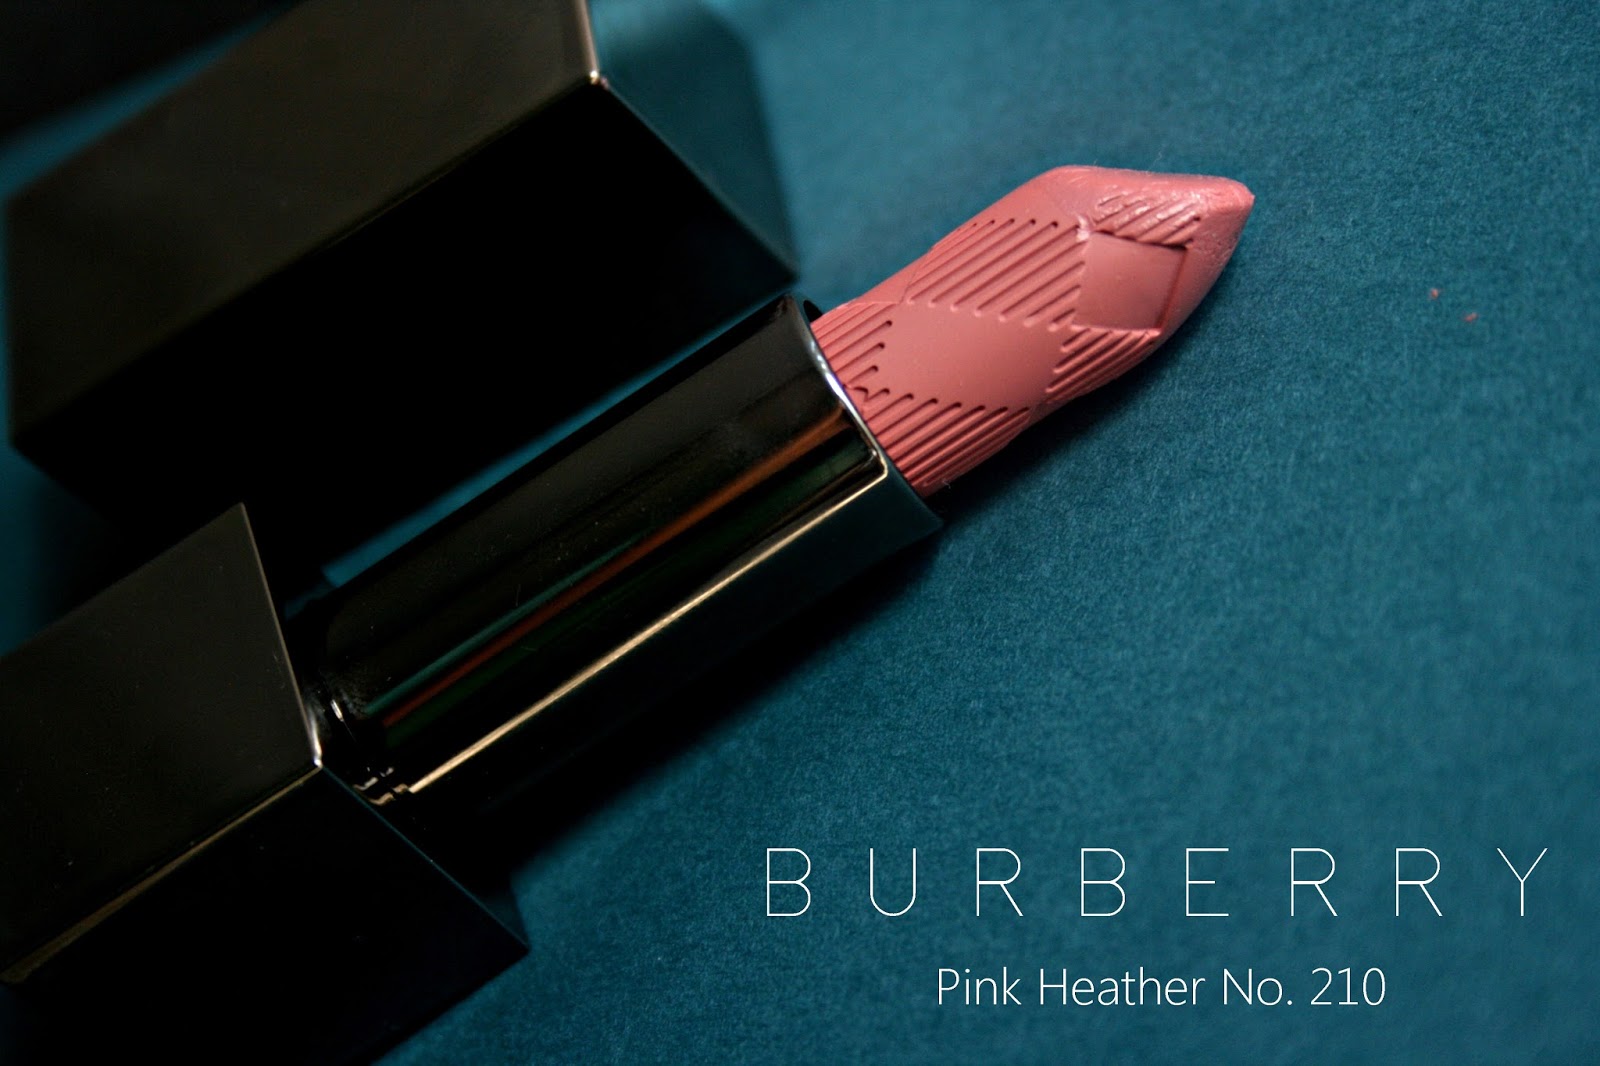 Burberry Pink Heather No.210 Lip Mist Review, Photos & Swatches